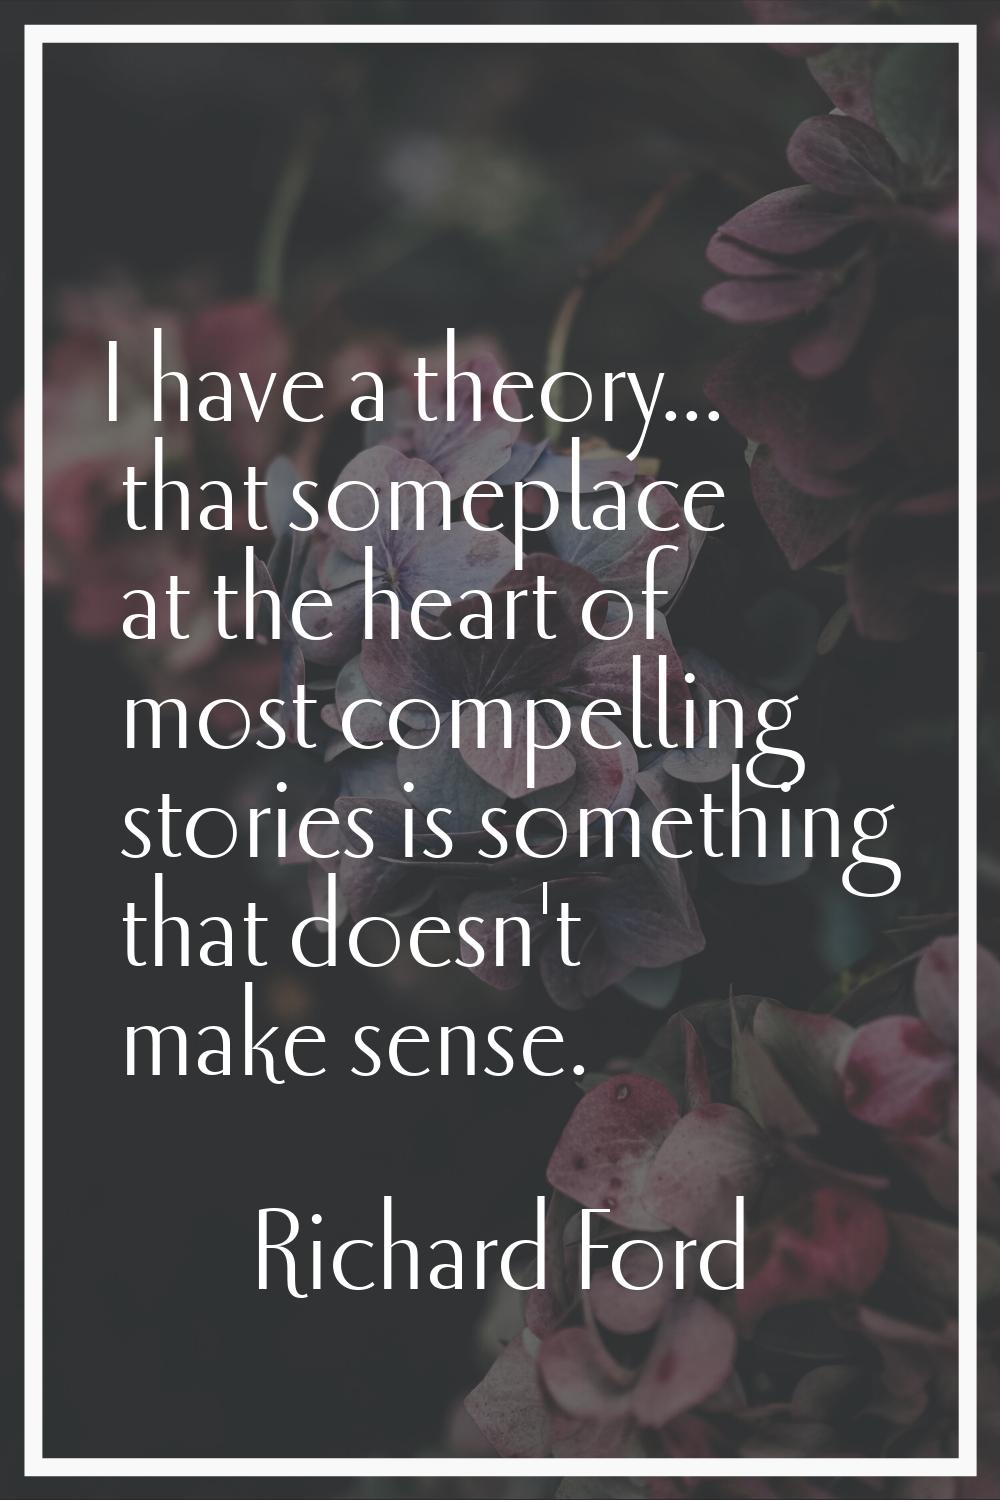 I have a theory... that someplace at the heart of most compelling stories is something that doesn't